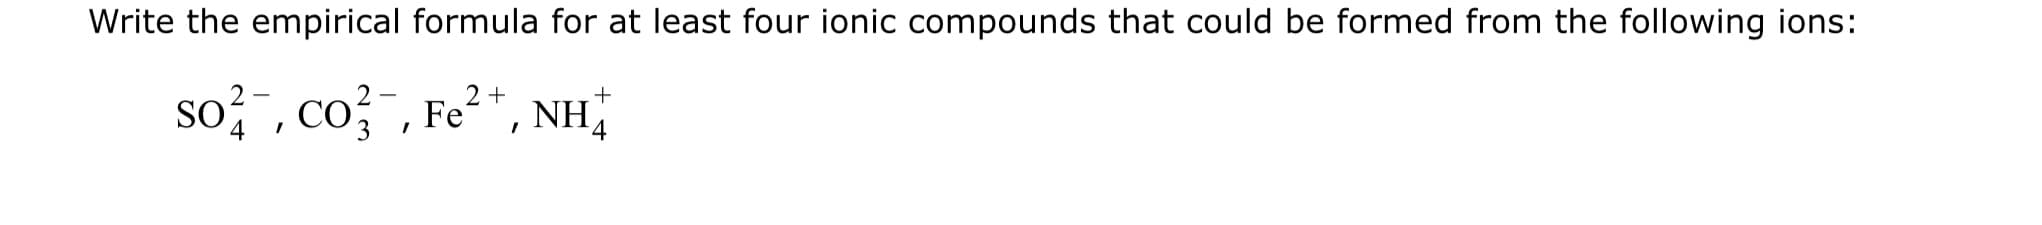 Write the empirical formula for at least four ionic compounds that could be formed from the following ions:
so? " , co;", Fe²*, NH,
co? ,
4
